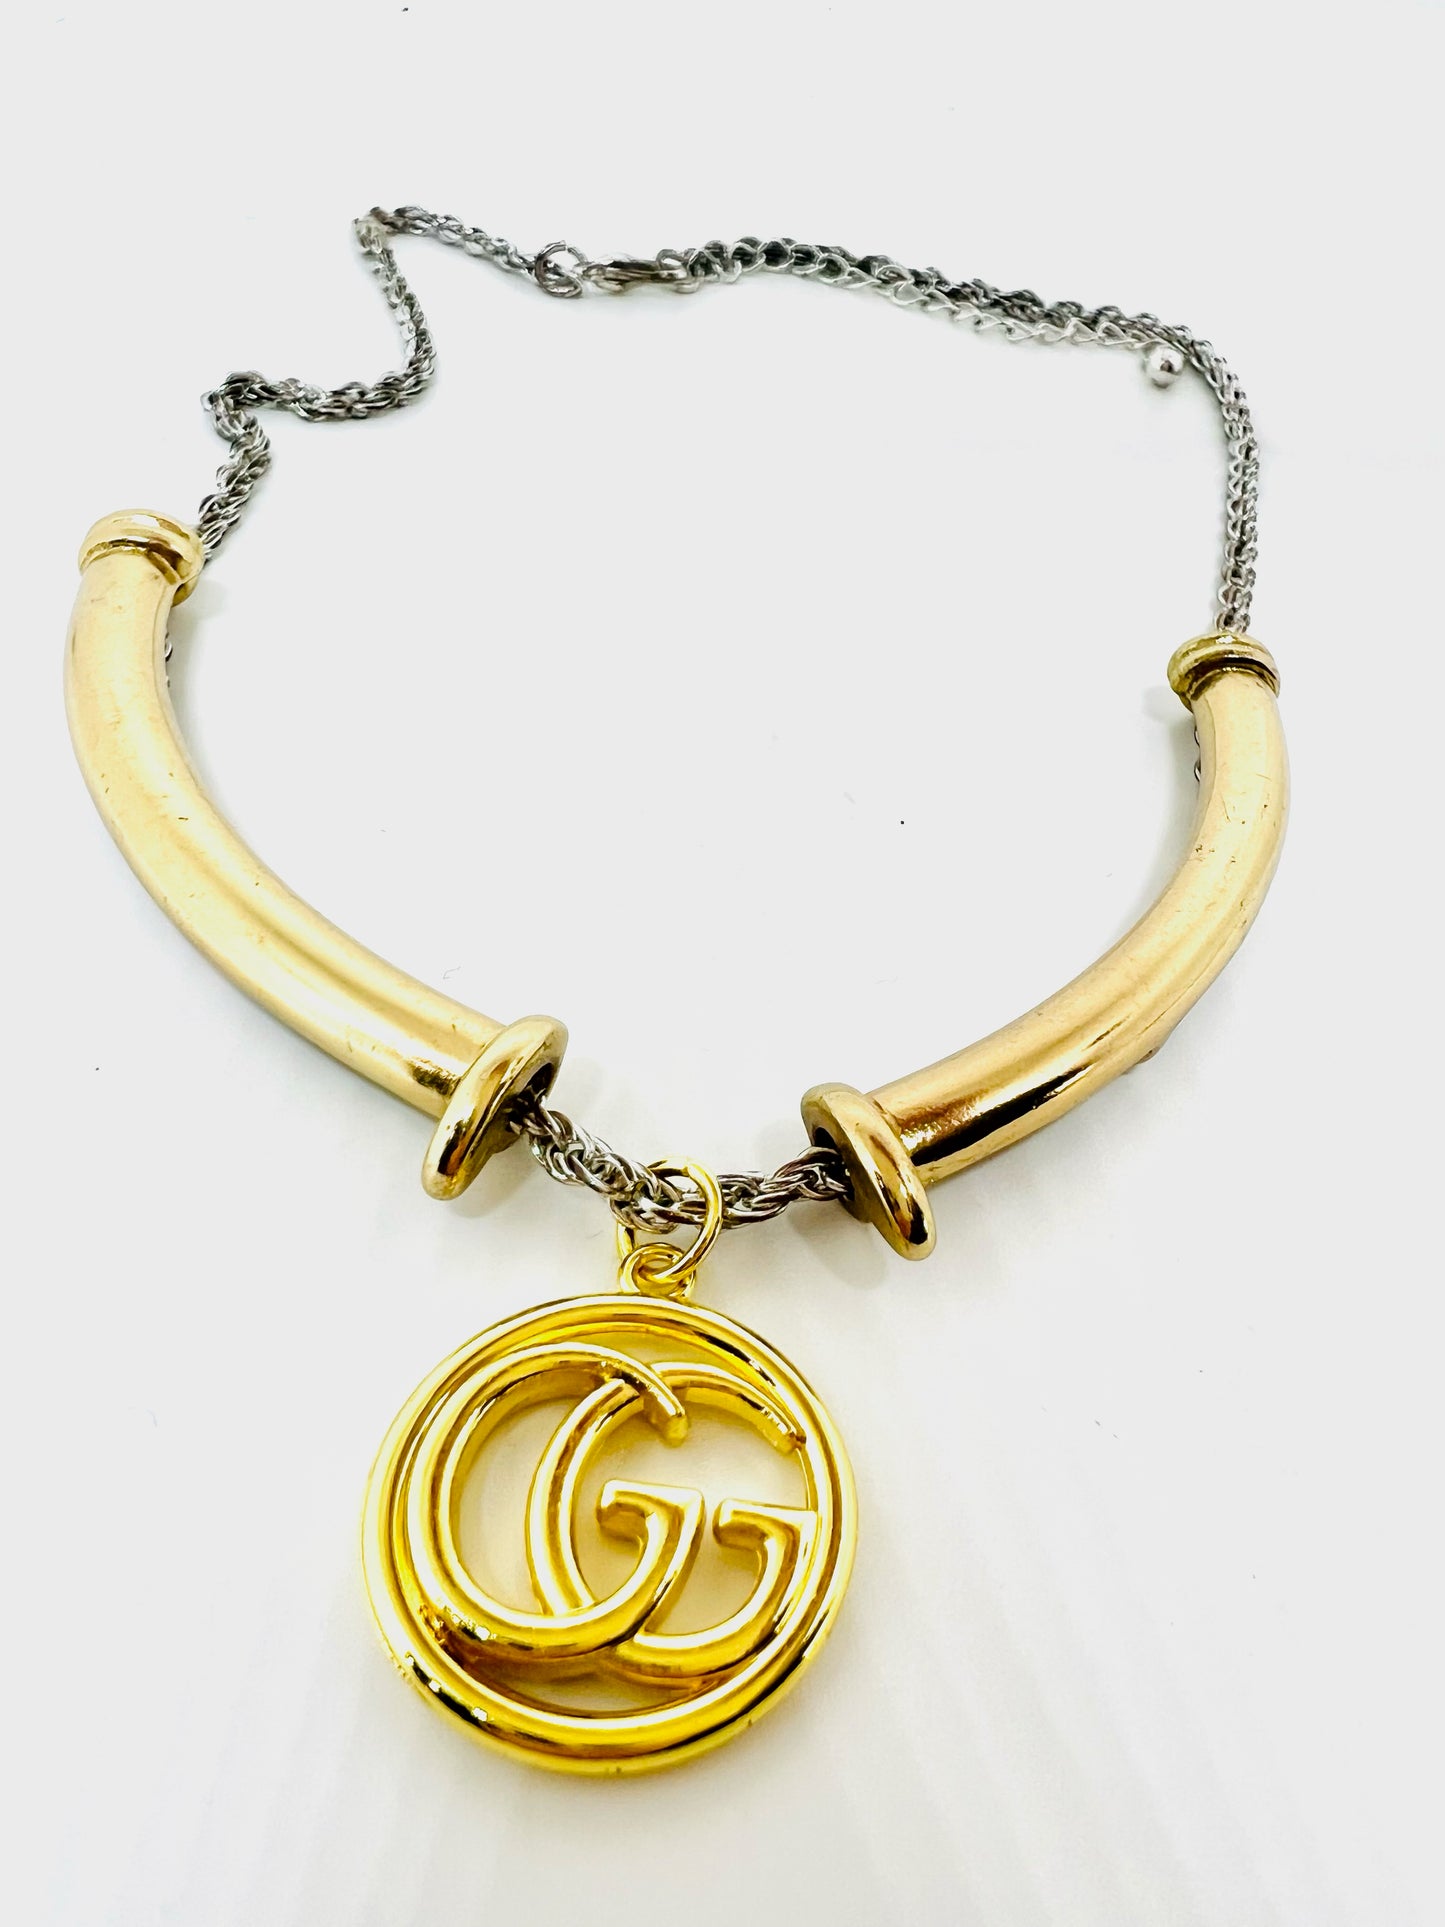 Gold Vintage Repurposed Charm Necklace